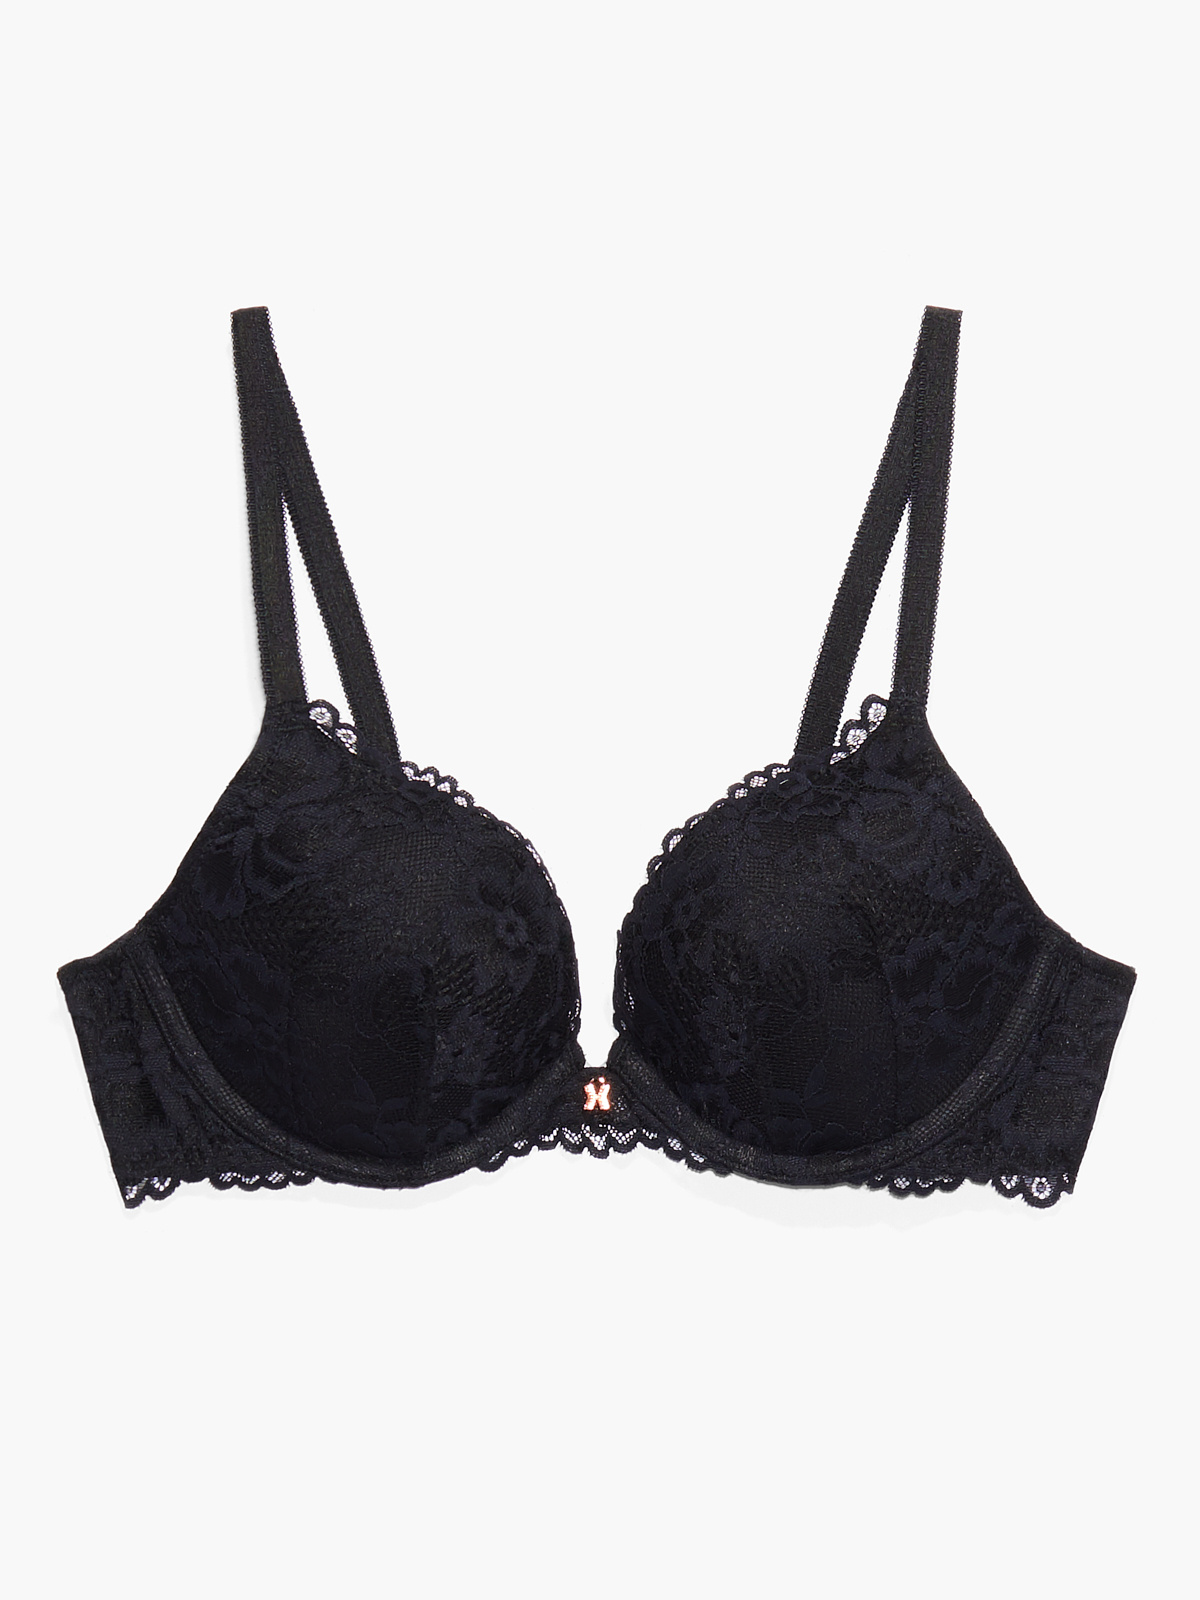 Floral Lace Push-Up Bra in Black | SAVAGE X FENTY